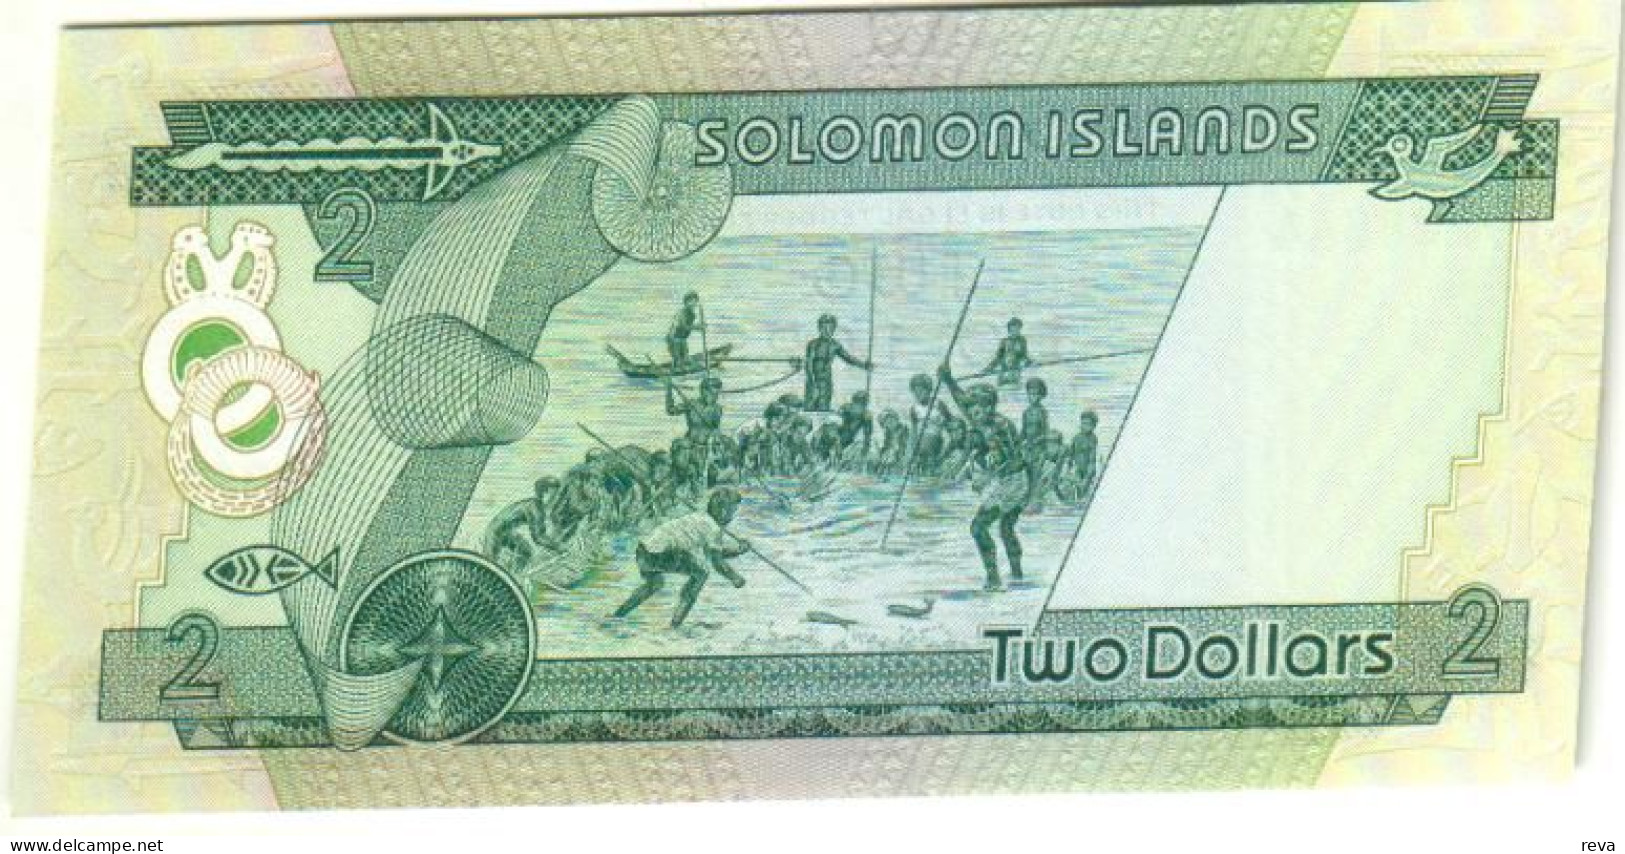 SOLOMON ISLANDS $2  GREEN QEII FRONT PEOPLE BACK ND(1977) P5a F+ 1 YEAR ONLY READ DESCRIPTION !! - Salomons